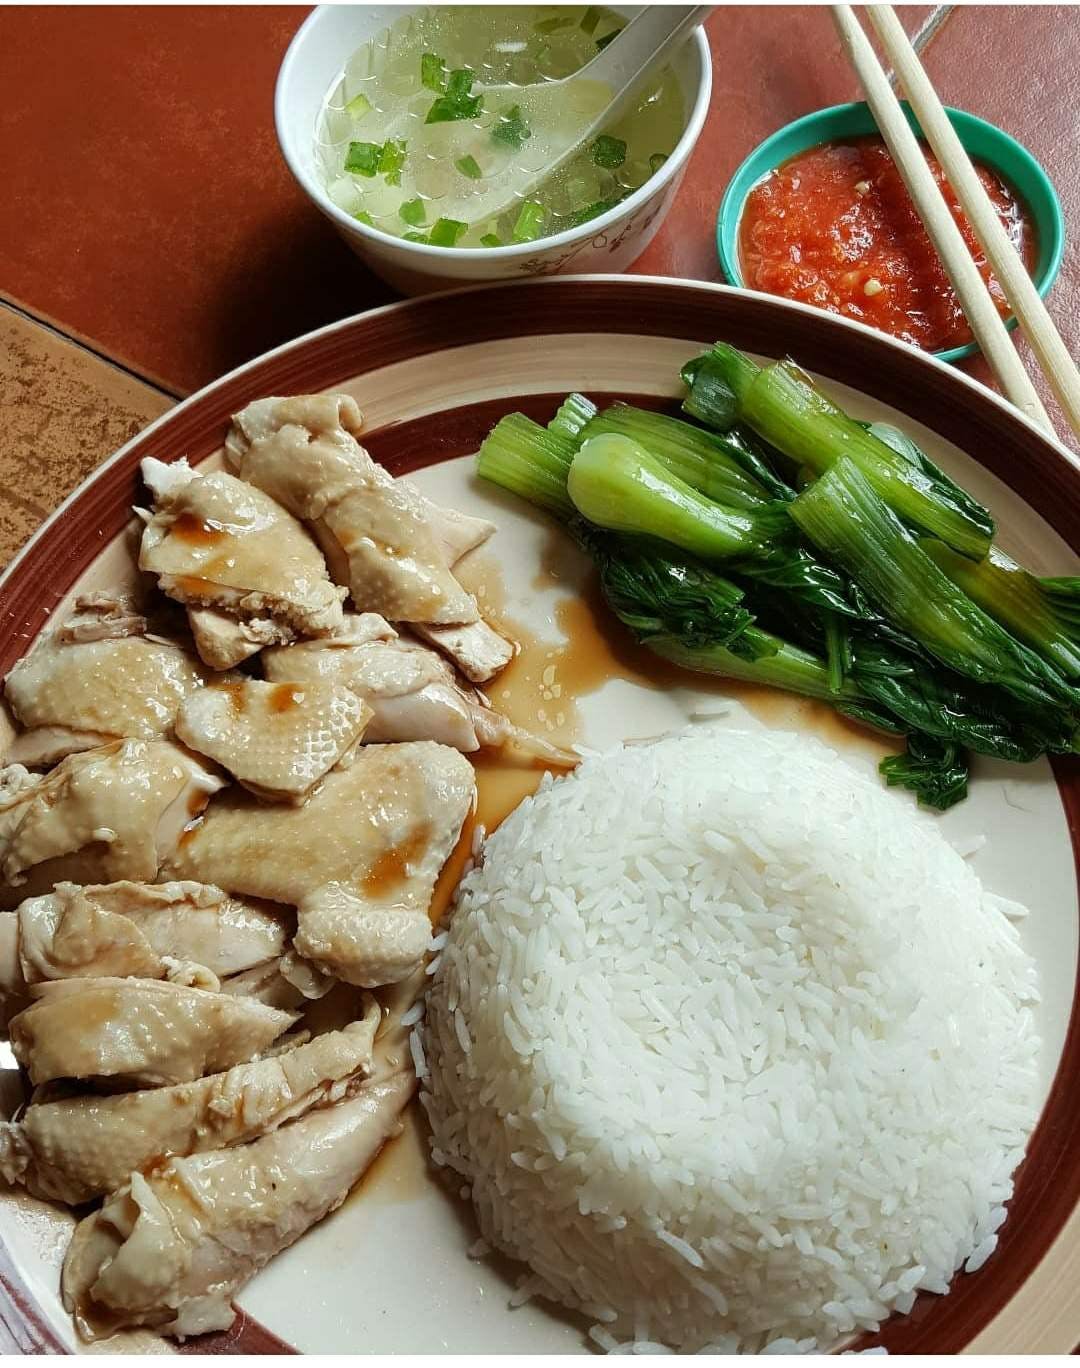 Dish,Food,Cuisine,Ingredient,Steamed rice,Produce,Hainanese chicken rice,Comfort food,White rice,Lunch